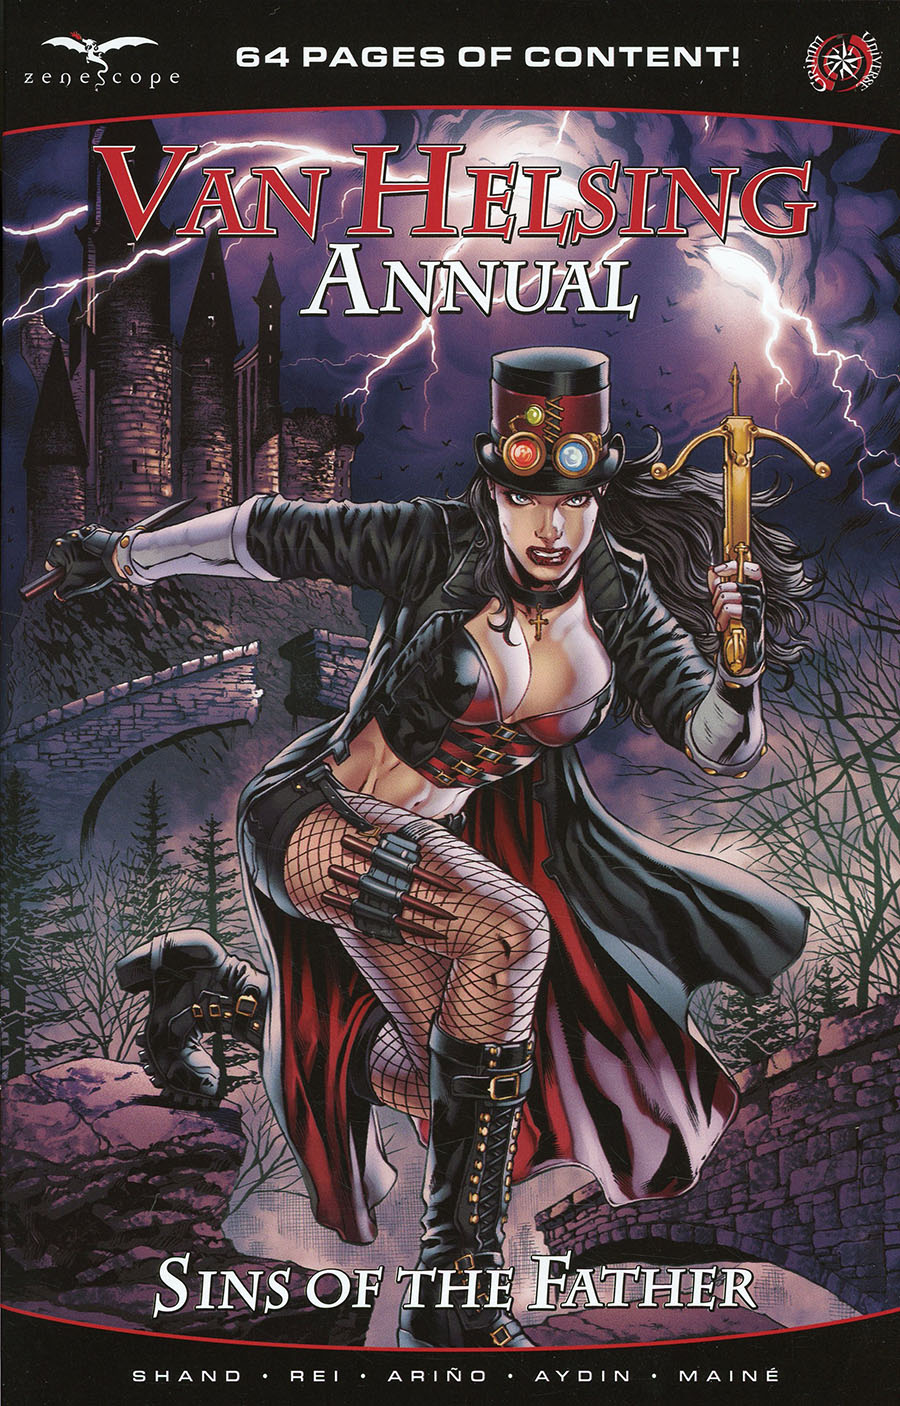 Grimm Fairy Tales Presents Van Helsing Annual Sins Of The Father #1 (One Shot) Cover A Igor Vitorino